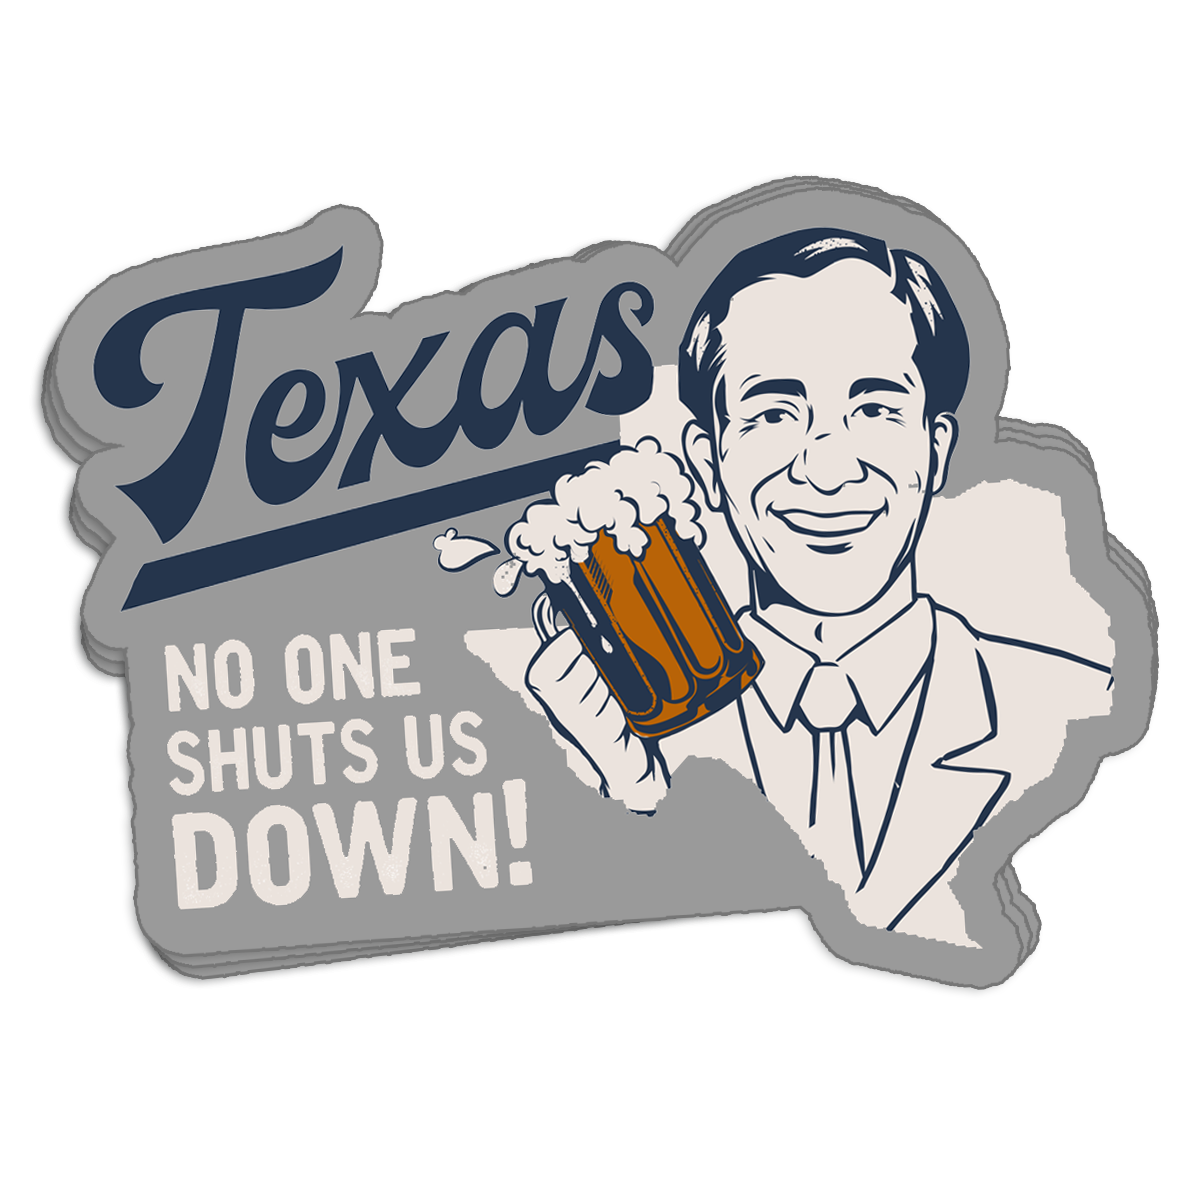 Texas - No One Shuts Us Down! - Decal